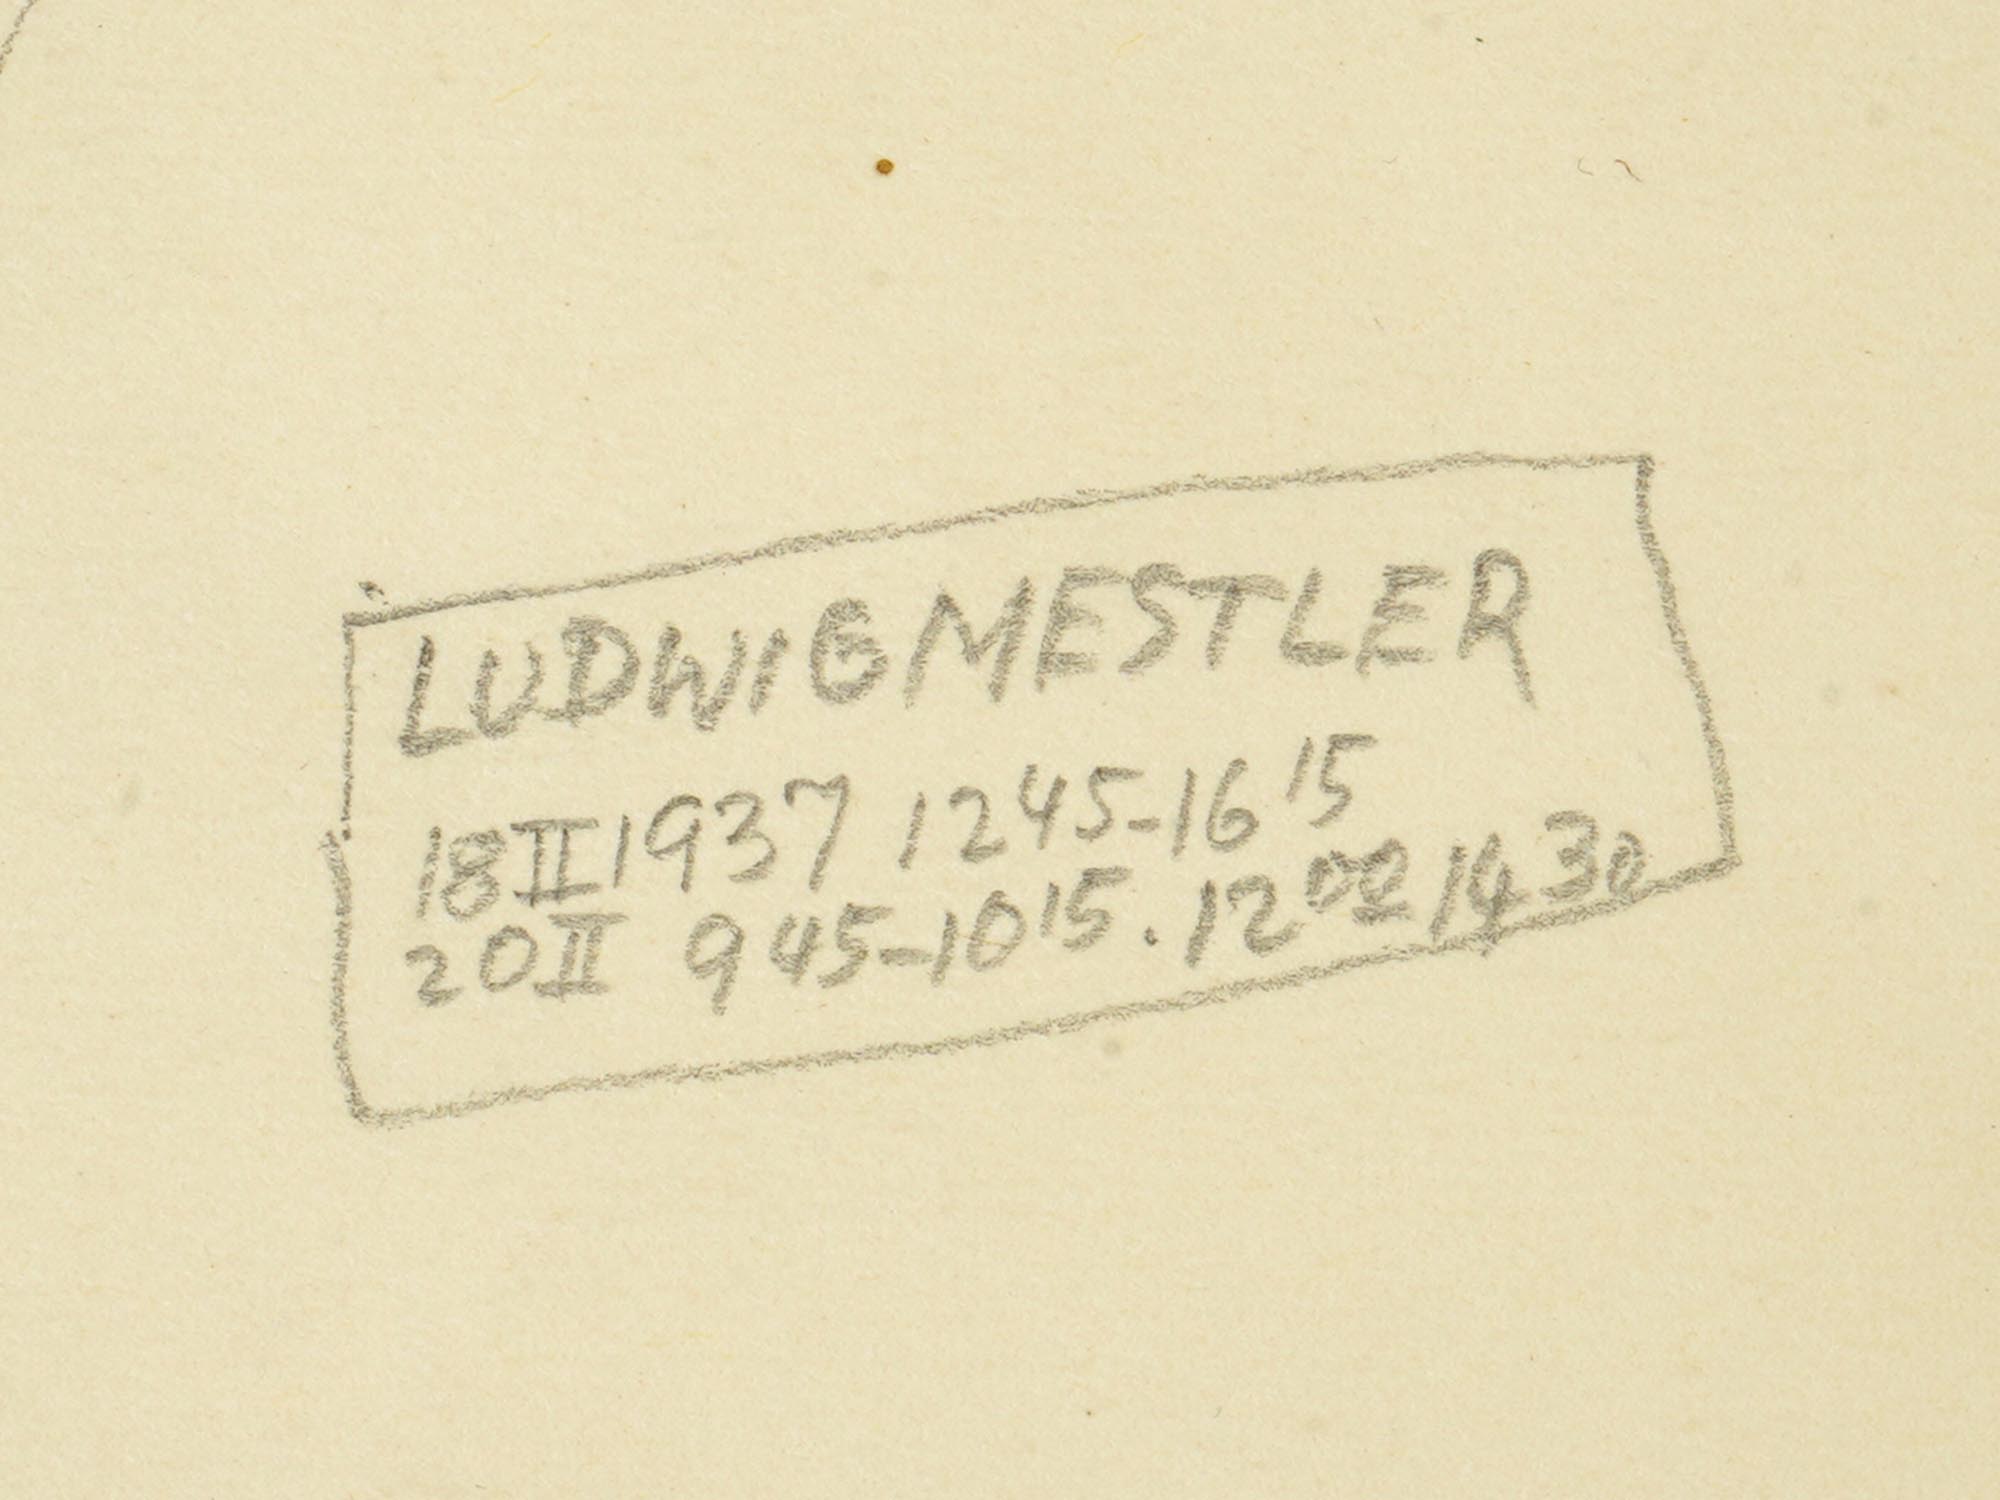 COLLECTION OF GRAPHIC ARTWORKS BY LUDWIG MESTLER PIC-3